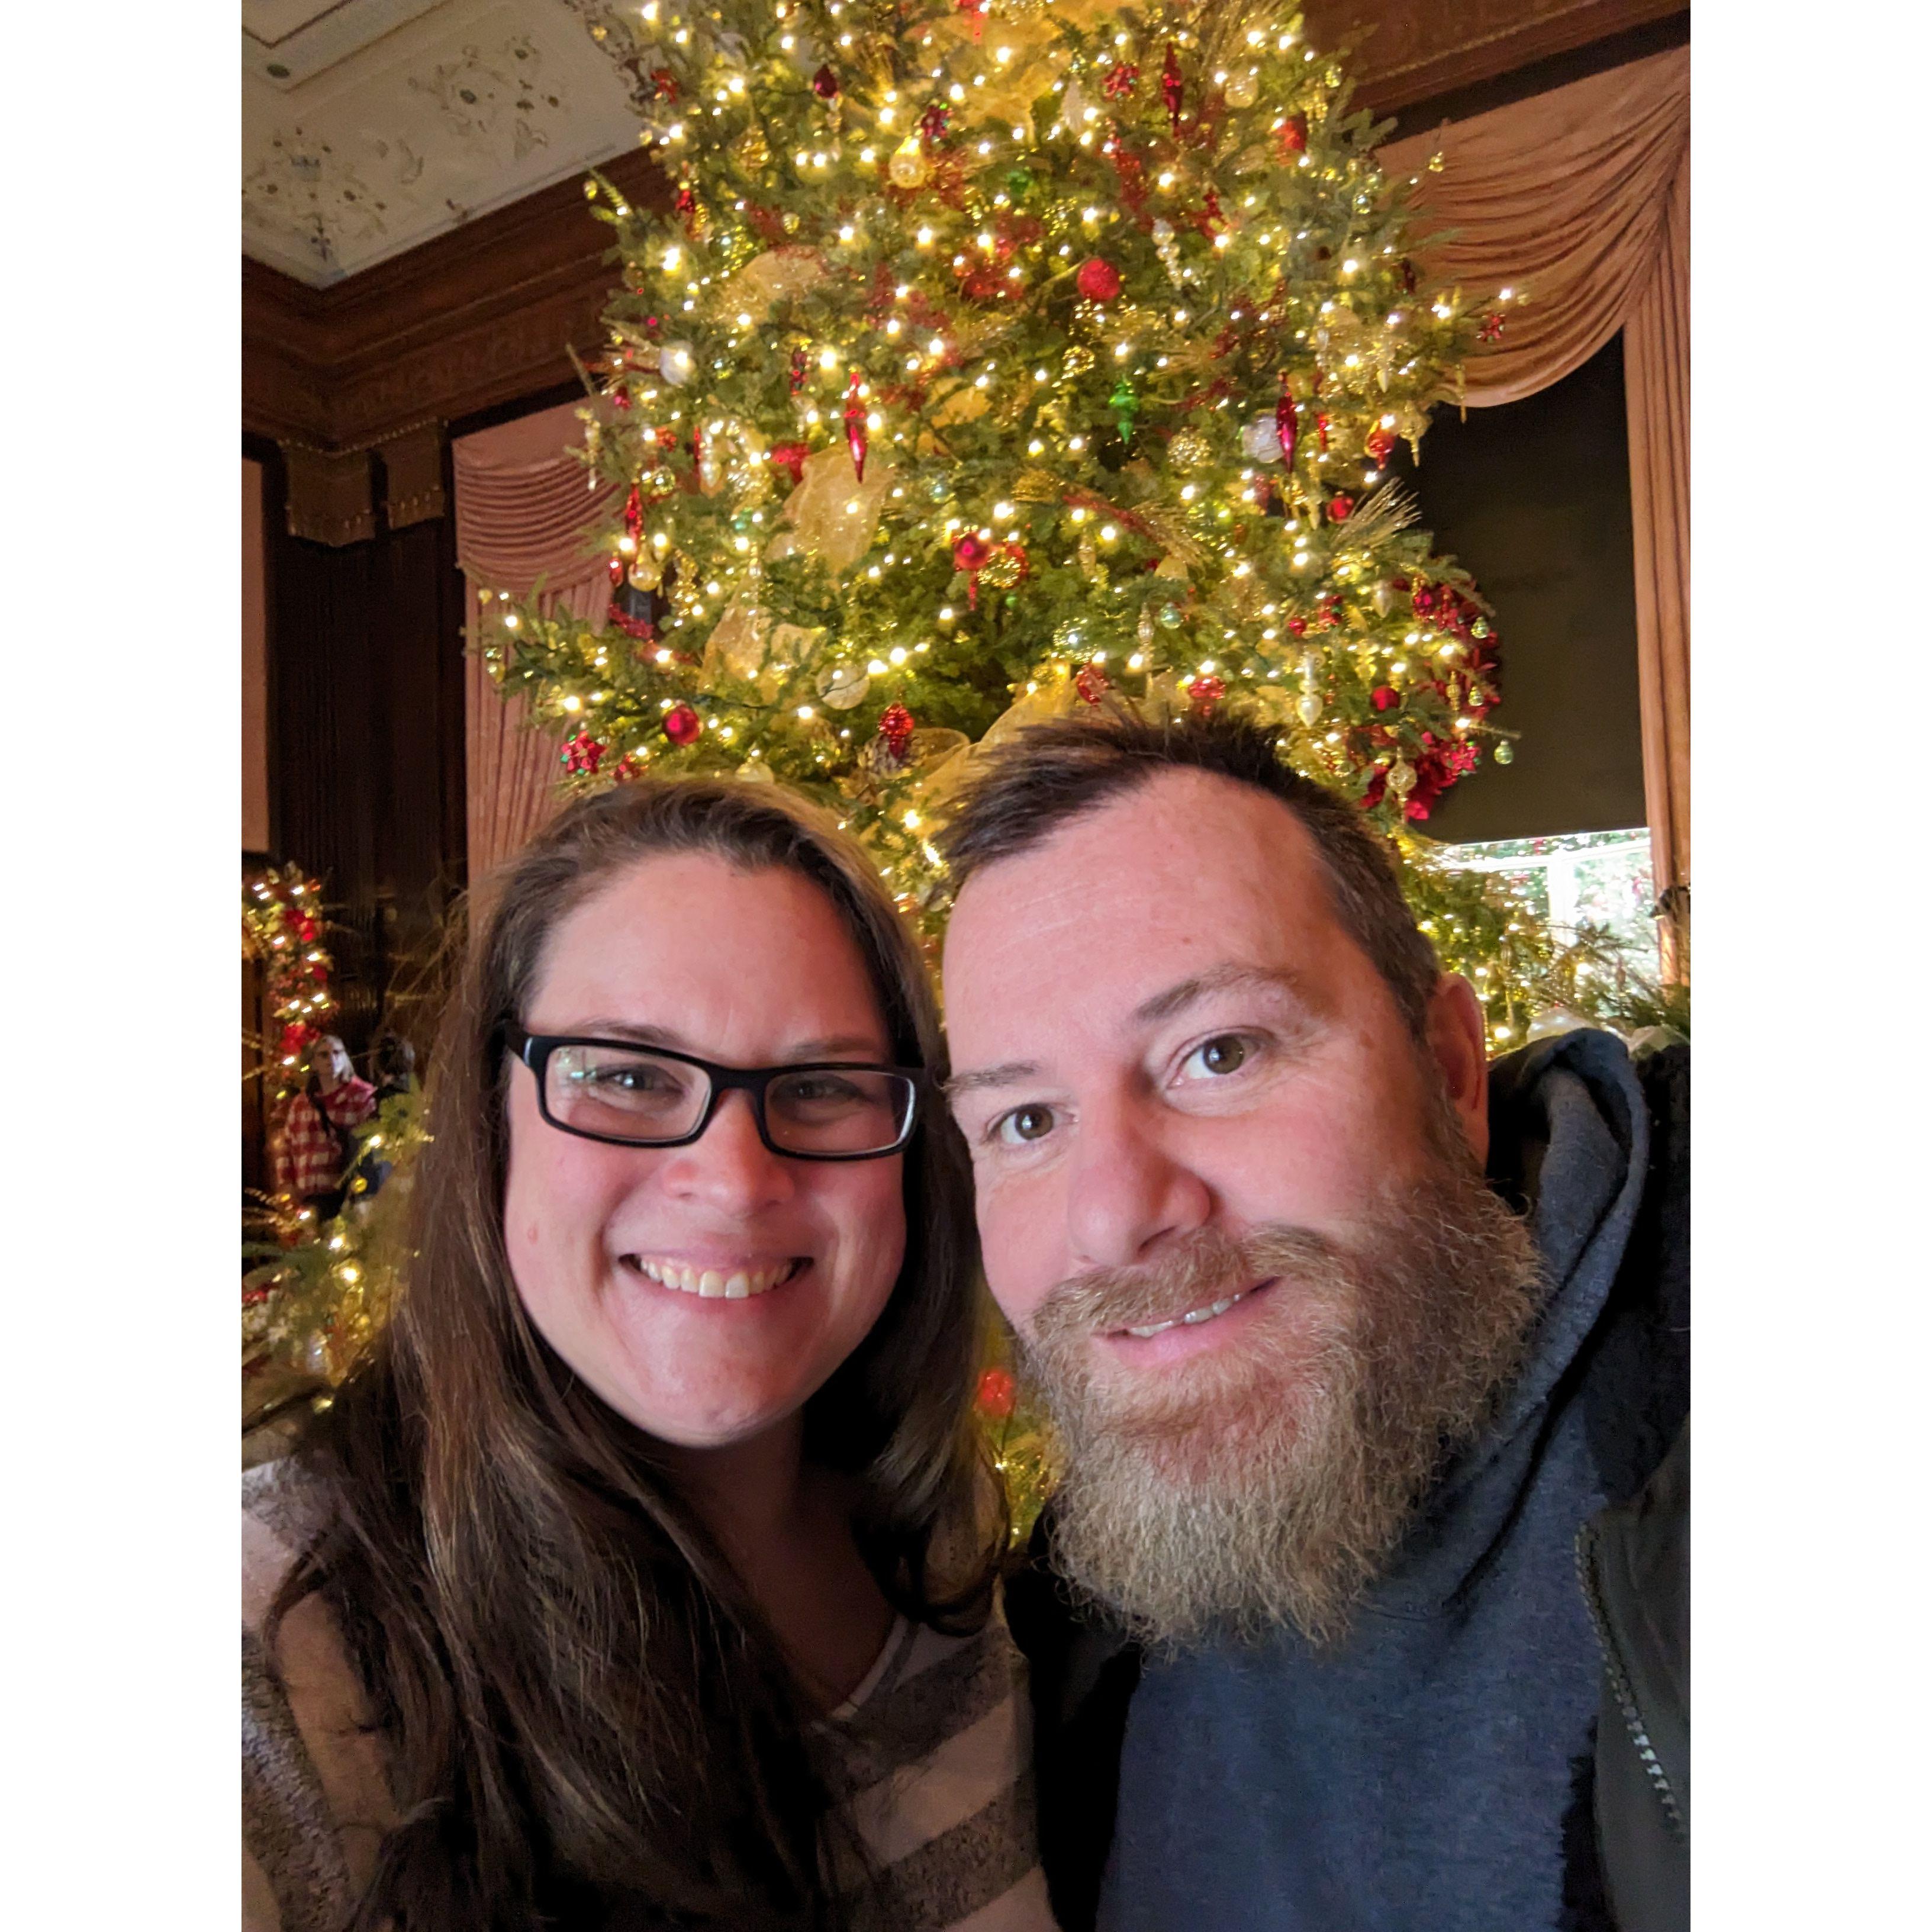 A  holiday trip to Longwood Gardens